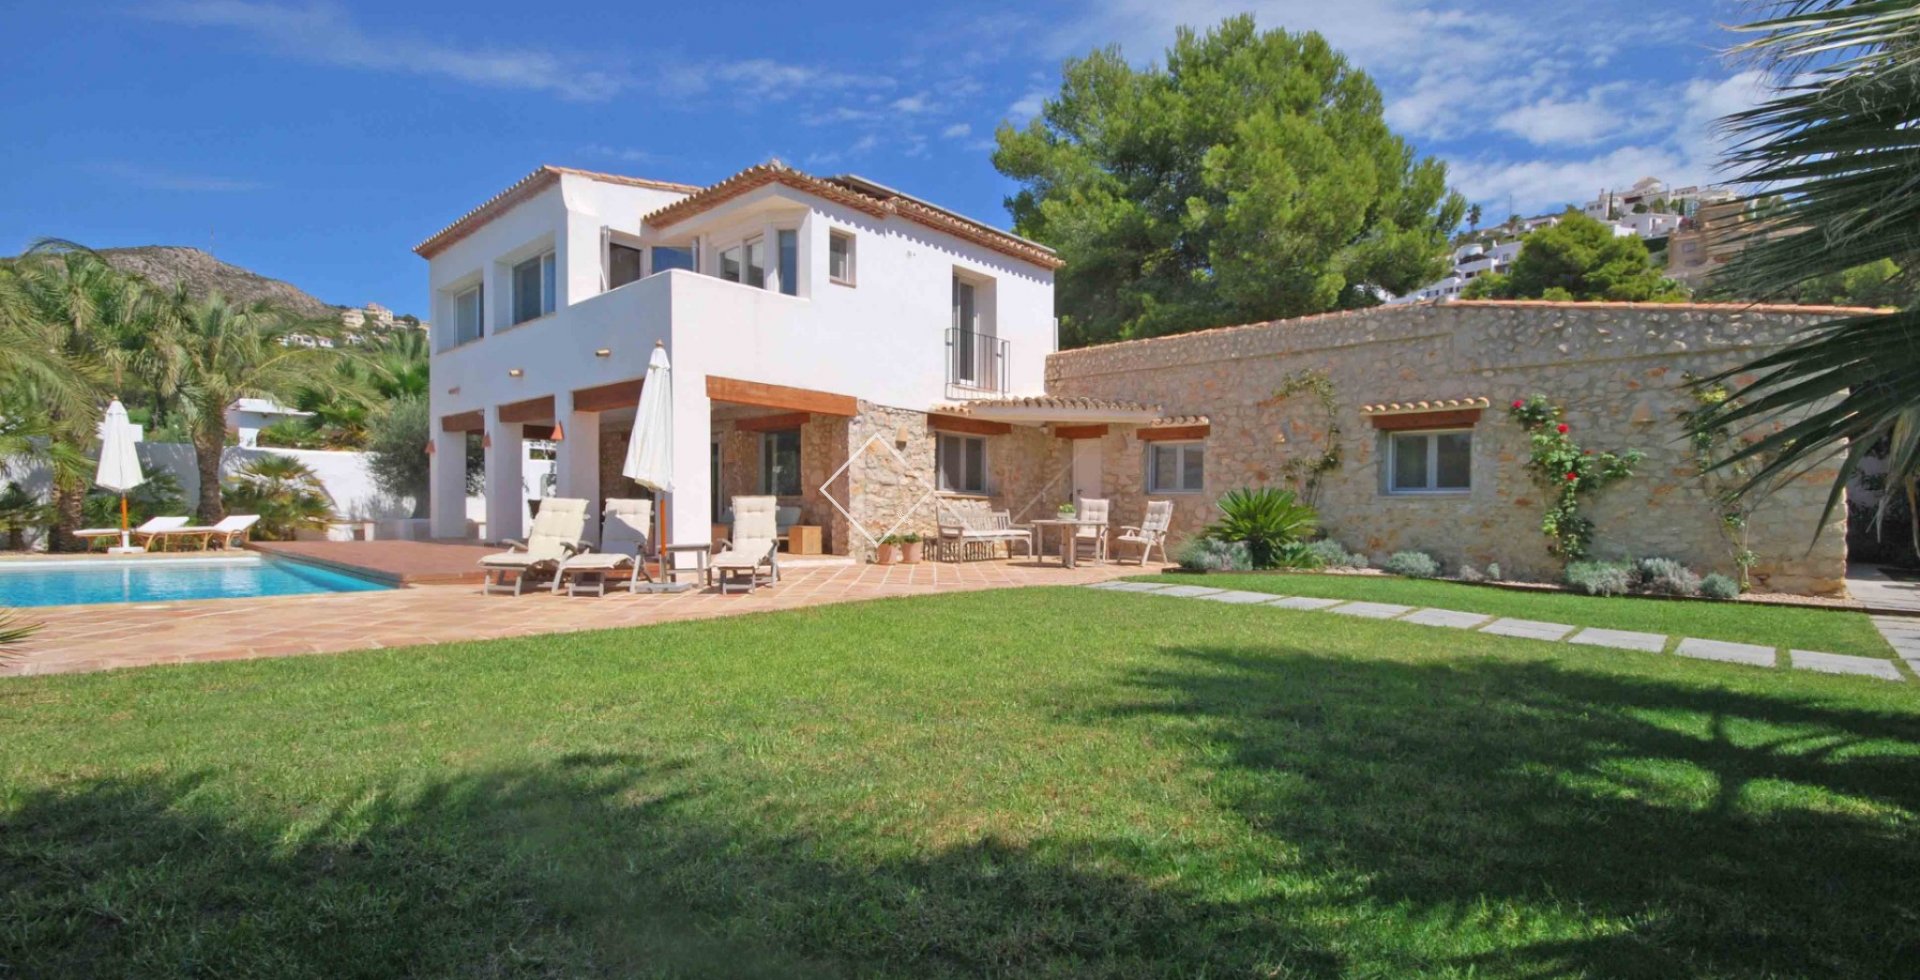 -garden and house for sale: superb villa in El Portet, Moraira only 300m from the beach